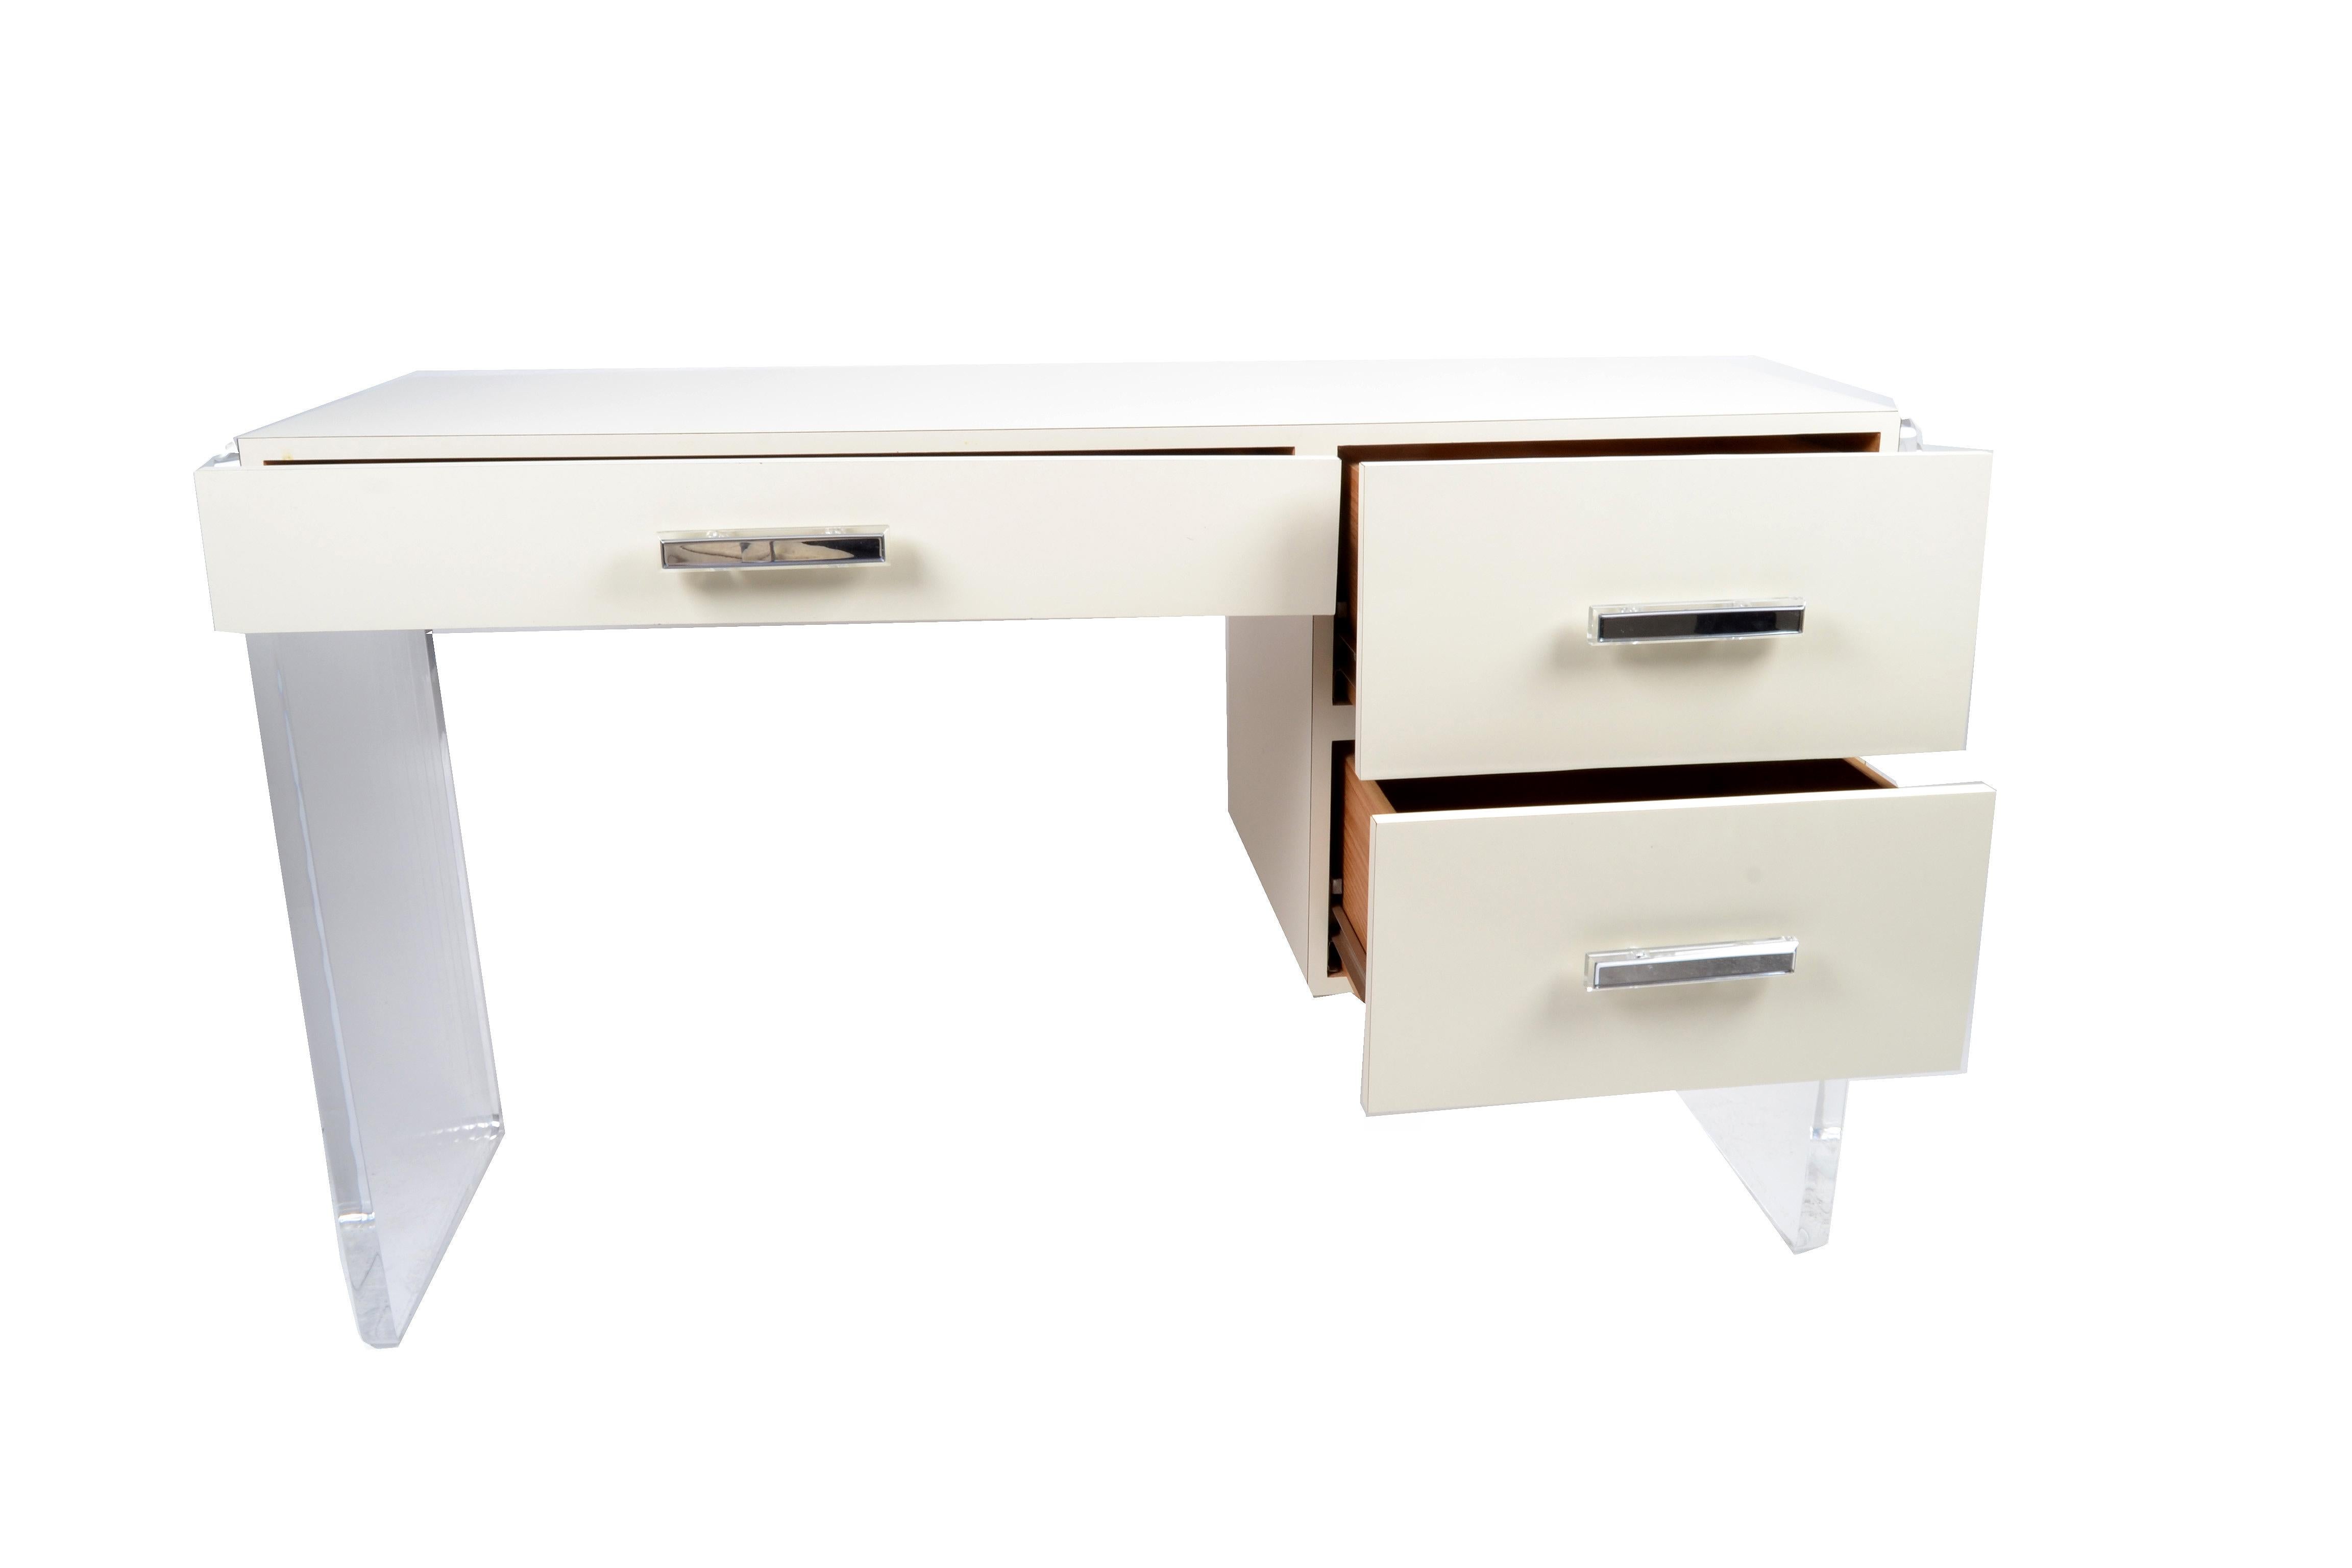 Mid-Century Modern Lucite and wood desk.
The desk features a drawer in the middle and two deeper drawers at the right side.
The handles are mirrored.

